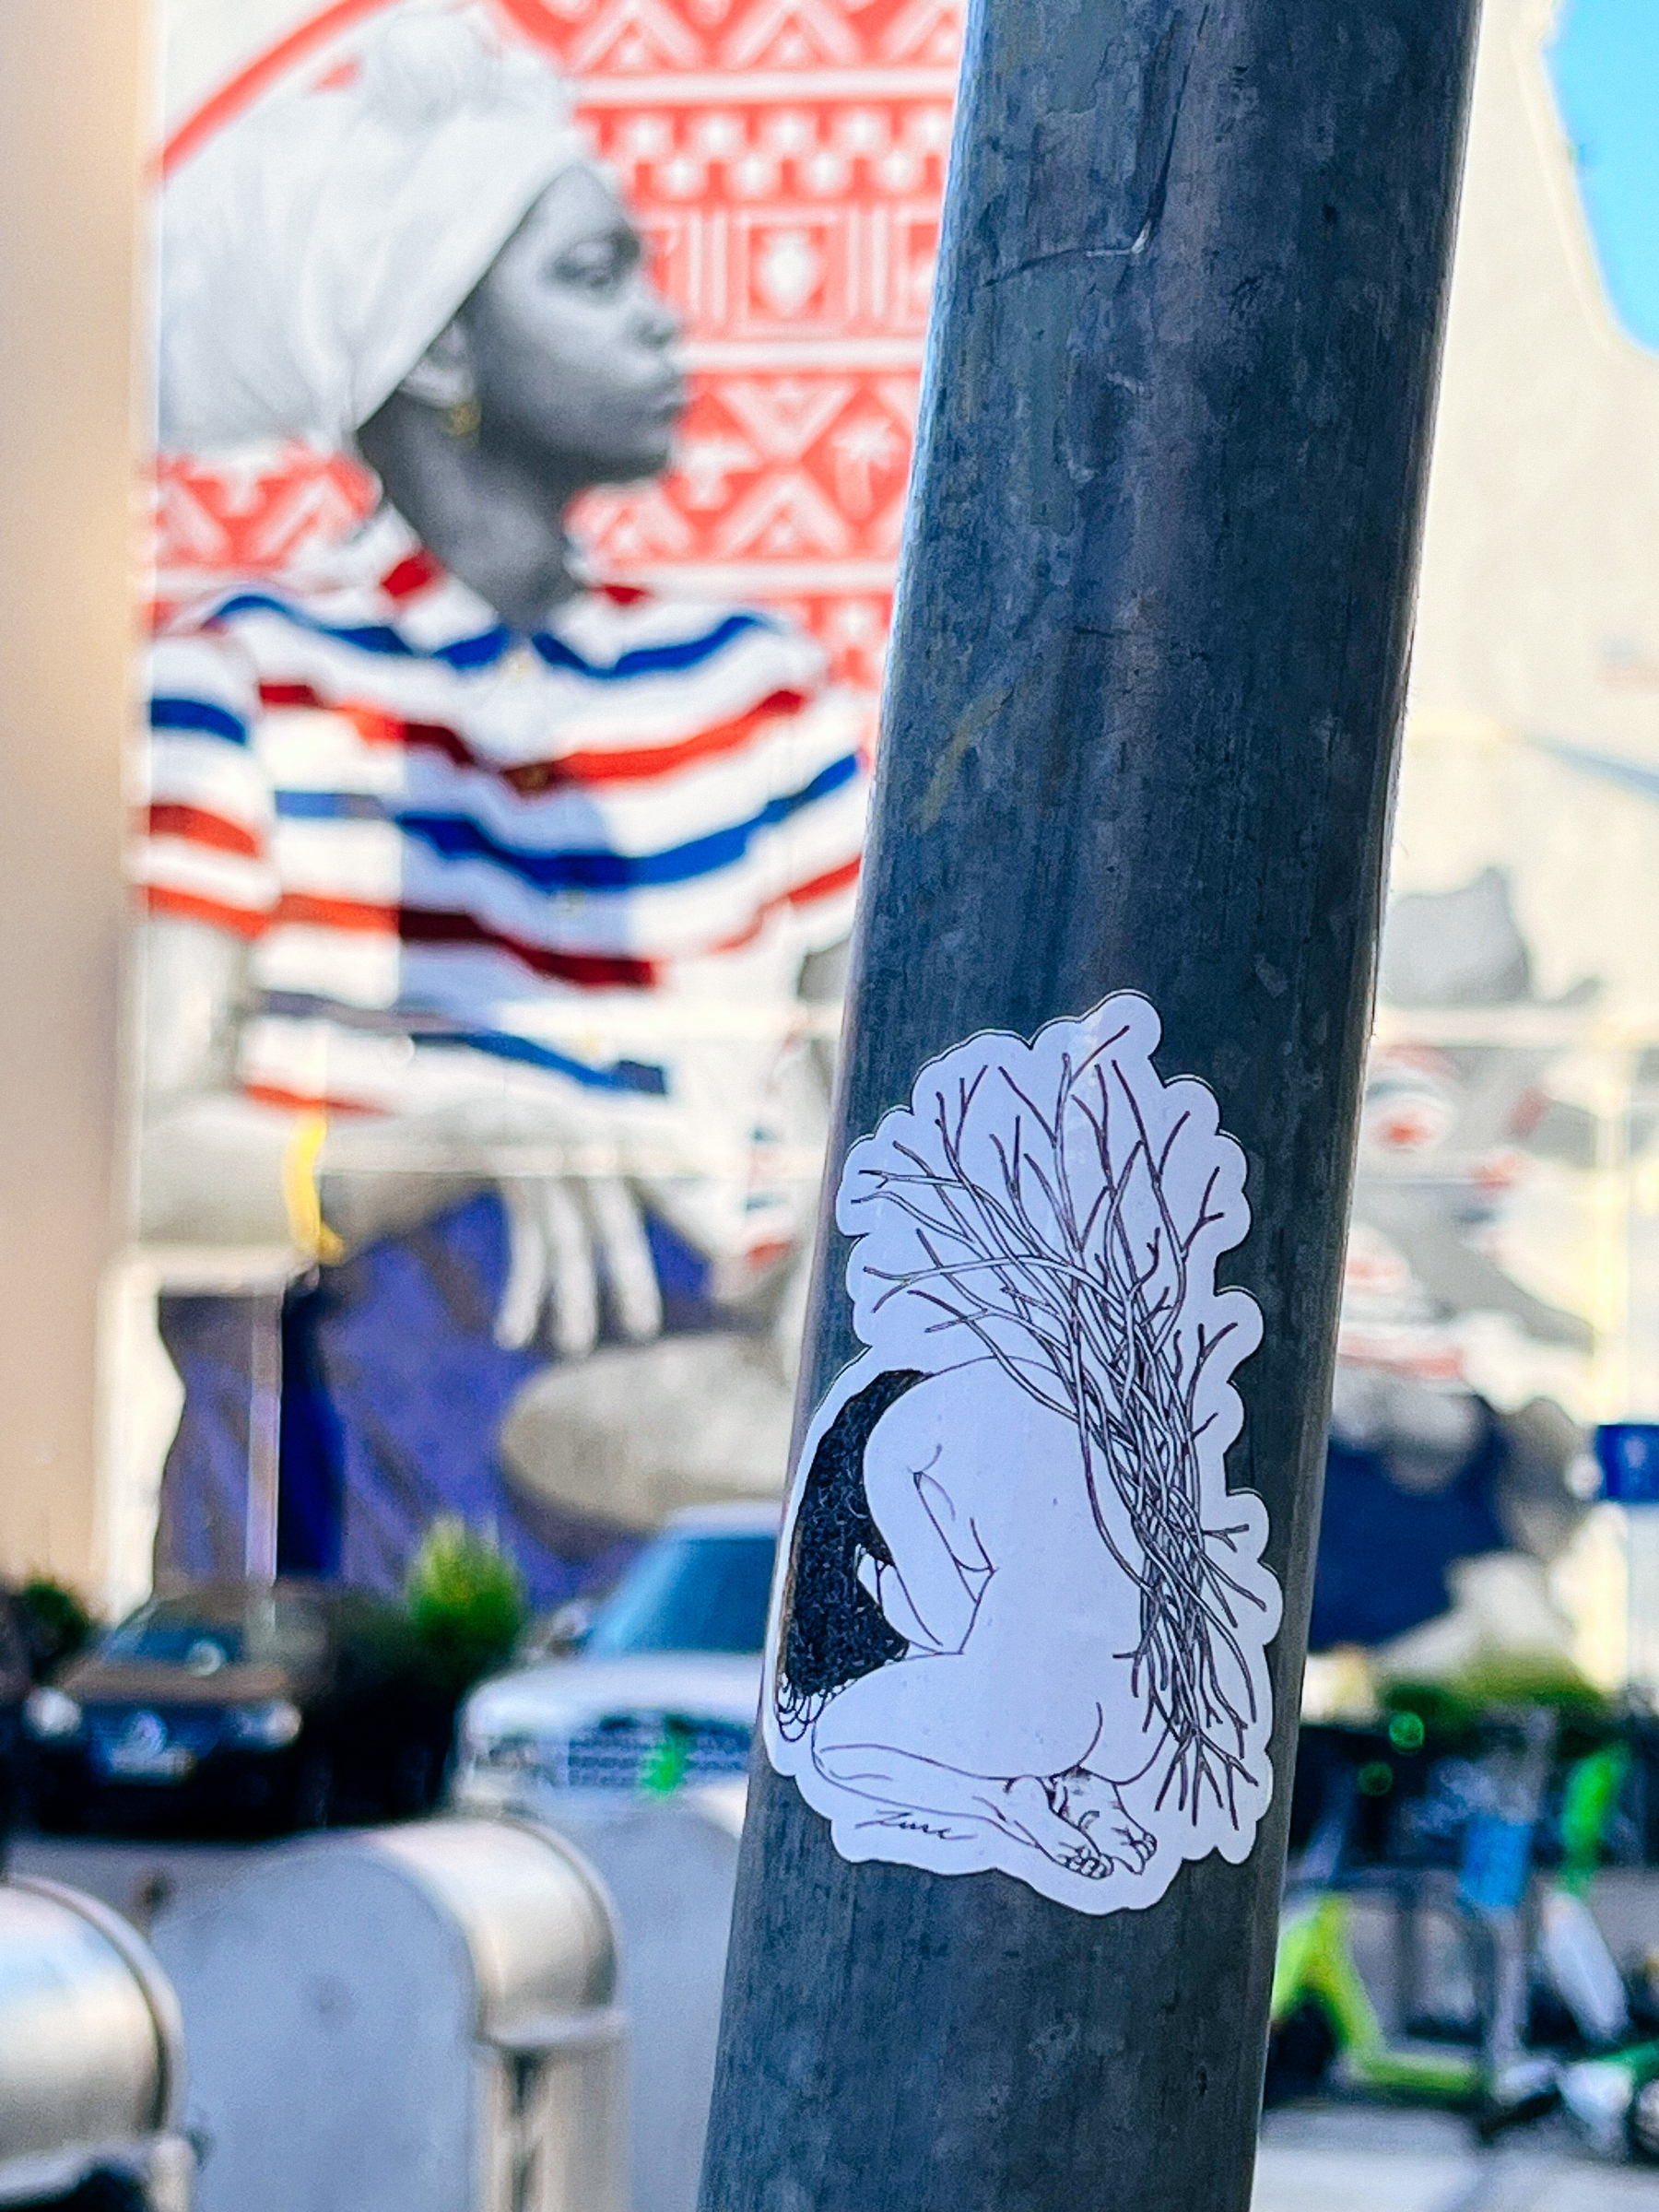 Sticker on a post. A woman, curled up, with branches on her back. In the background a graffiti of a woman, out of focus. 